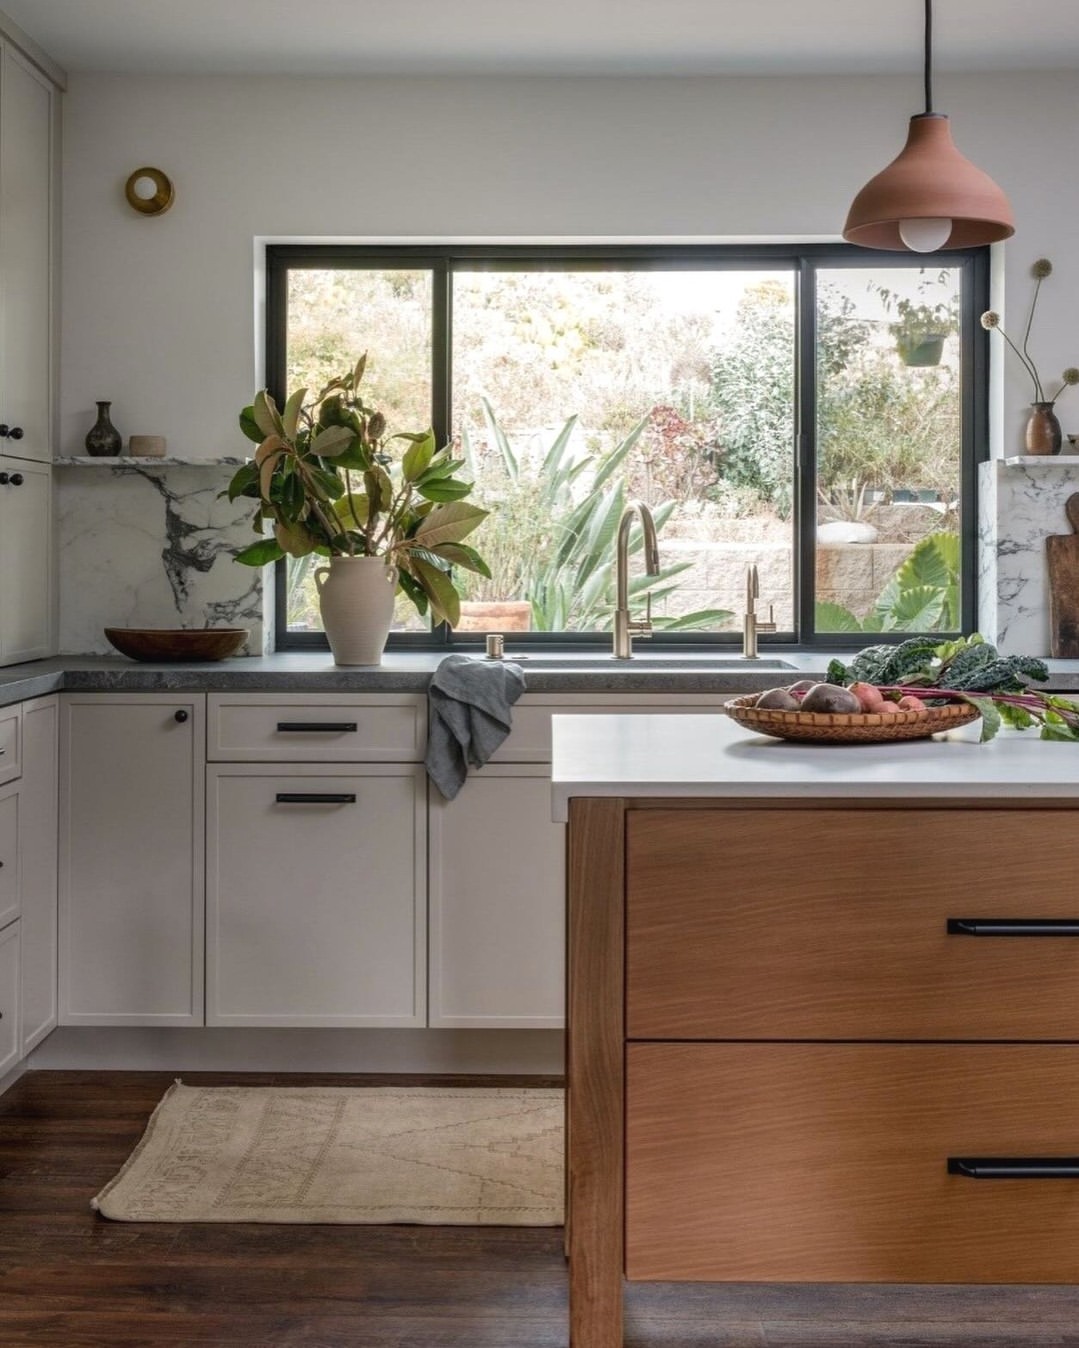 Earthy Modernism: Shaker Cabinets with Natural Wood Accents